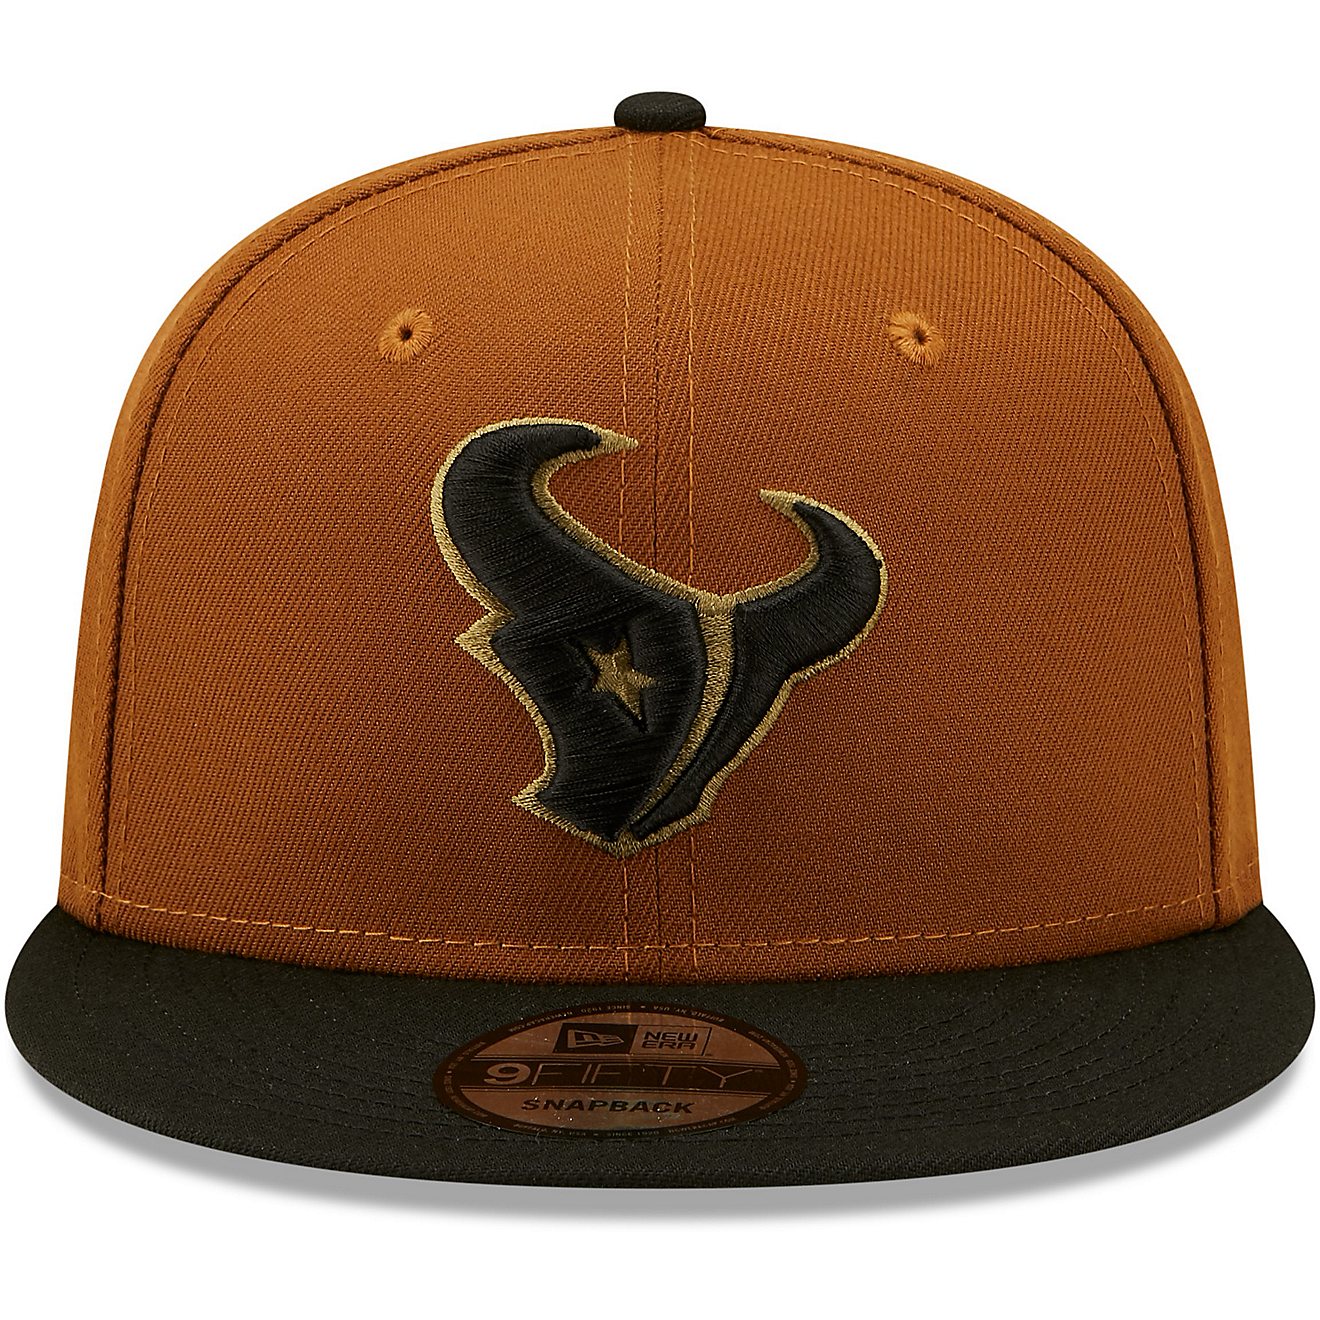 New Era Men's Houston Texans Colorpack 2T 9FIFTY Cap                                                                             - view number 3